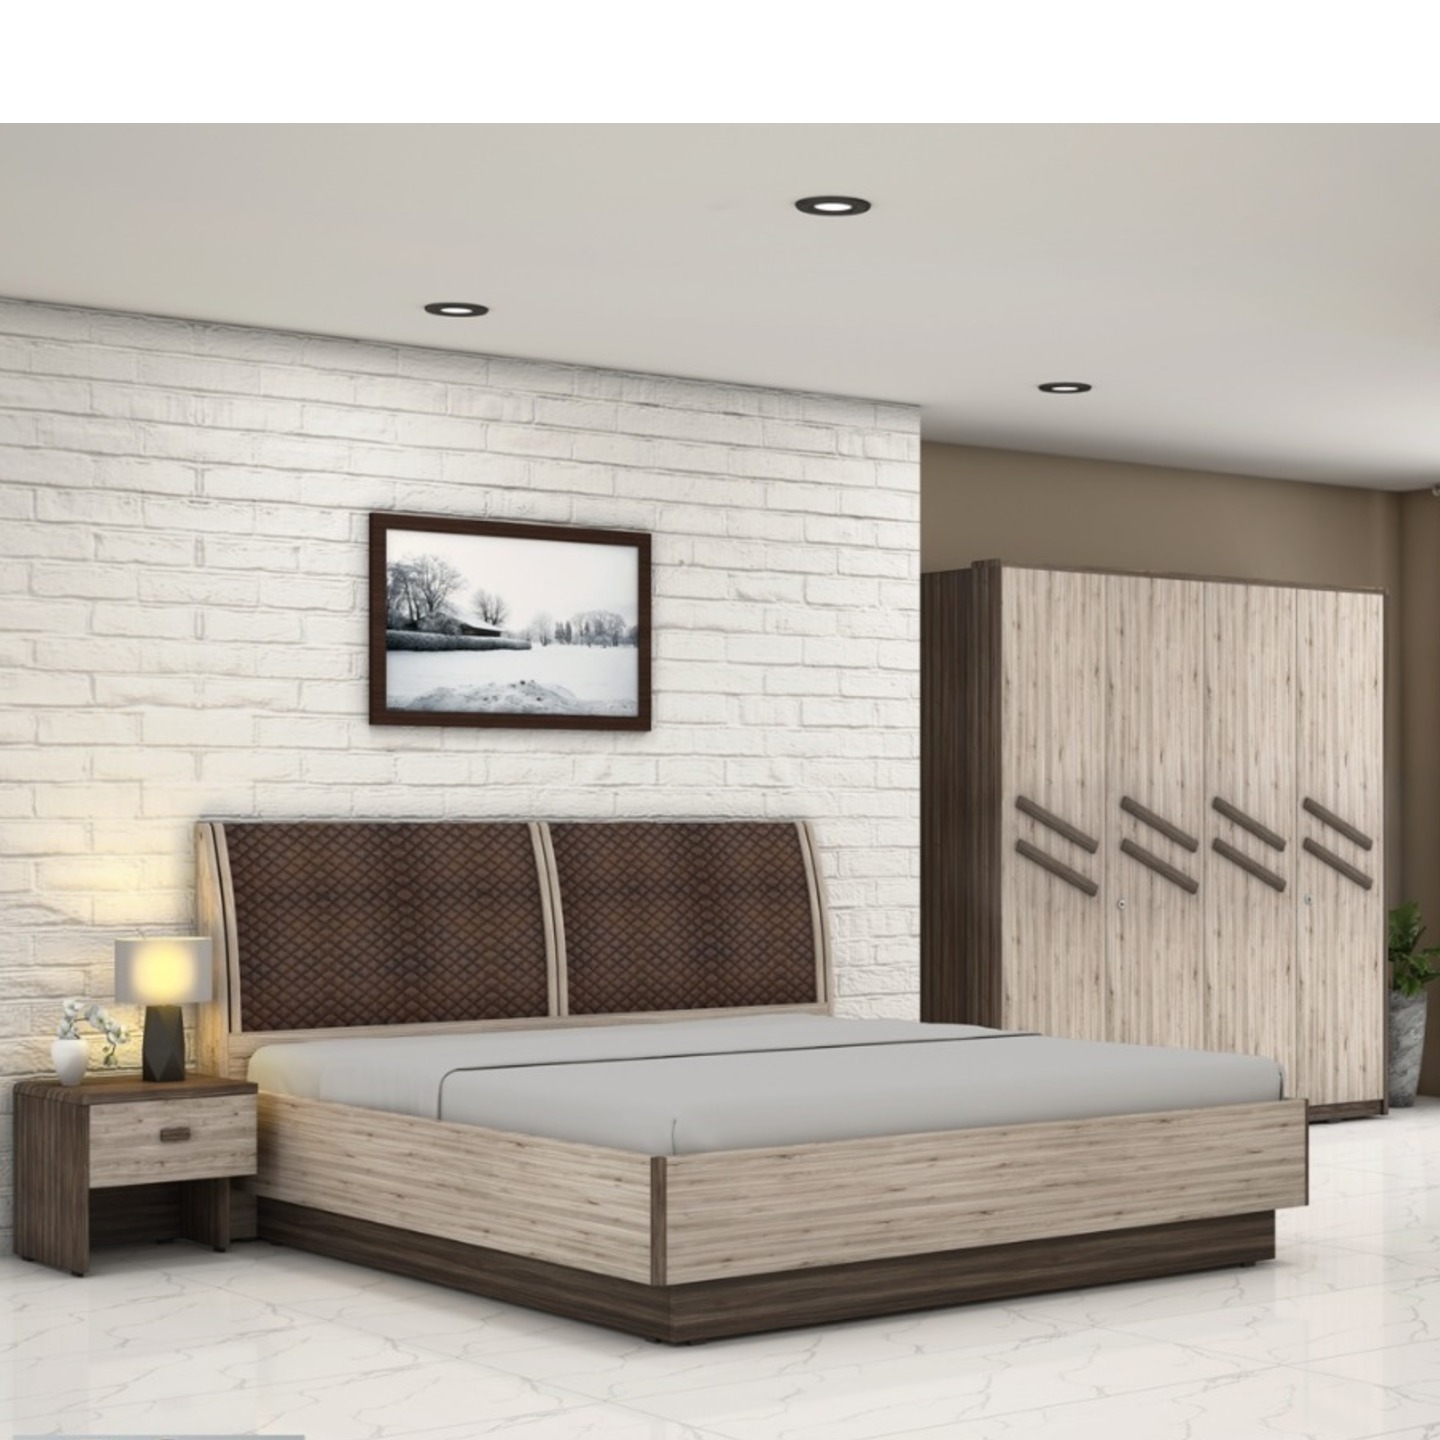 RD King Size Bed With Hydraulic 78"x 72" Rio In Brown Colour